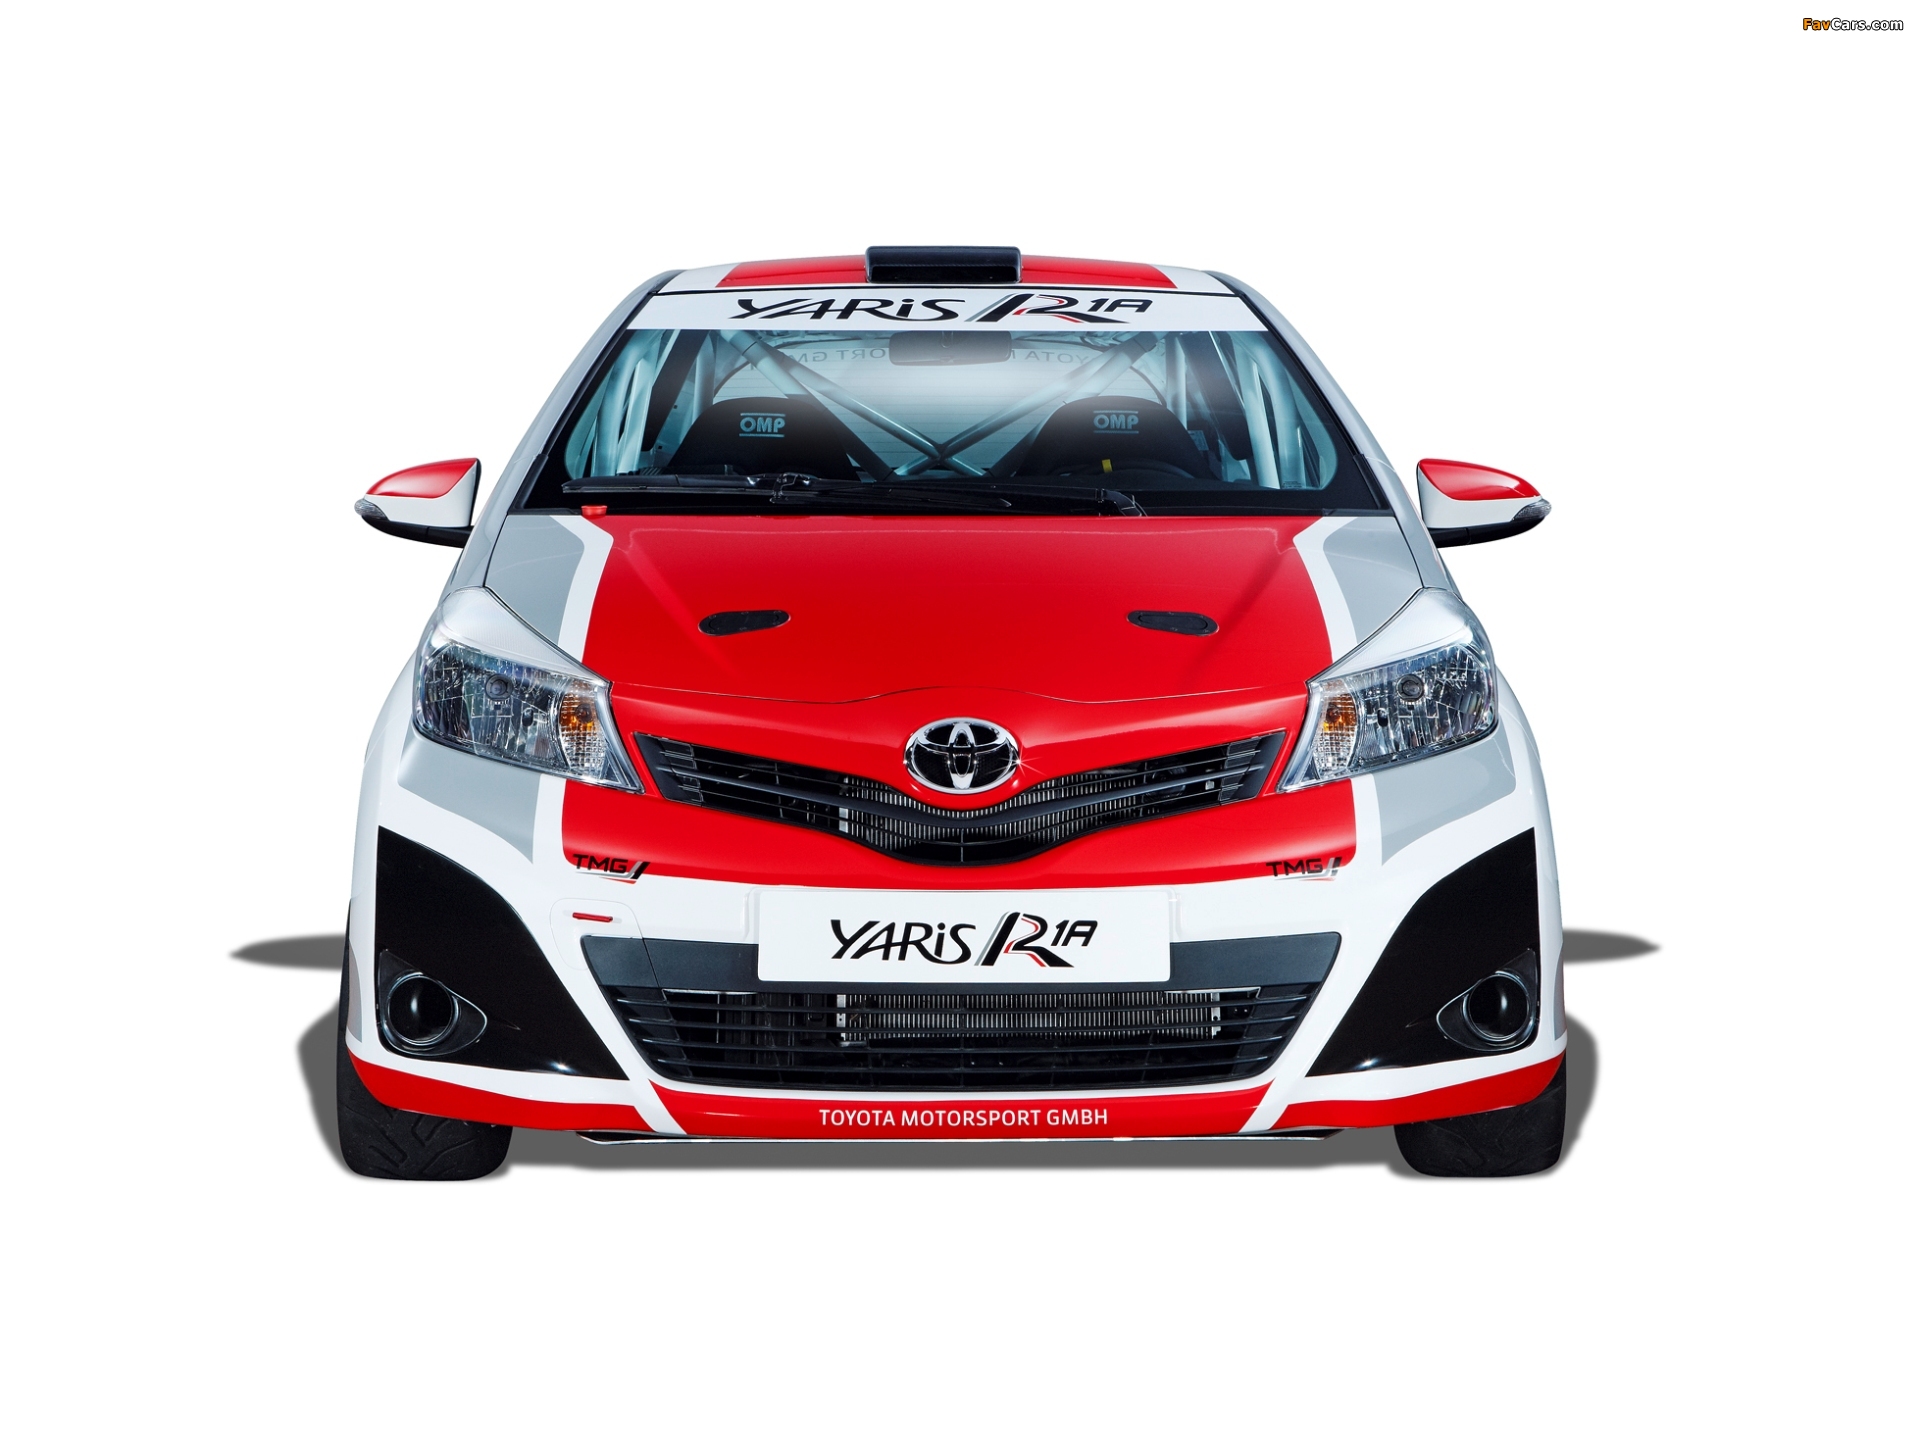 Toyota Yaris R1A Rally Car 2012 images (1920 x 1440)